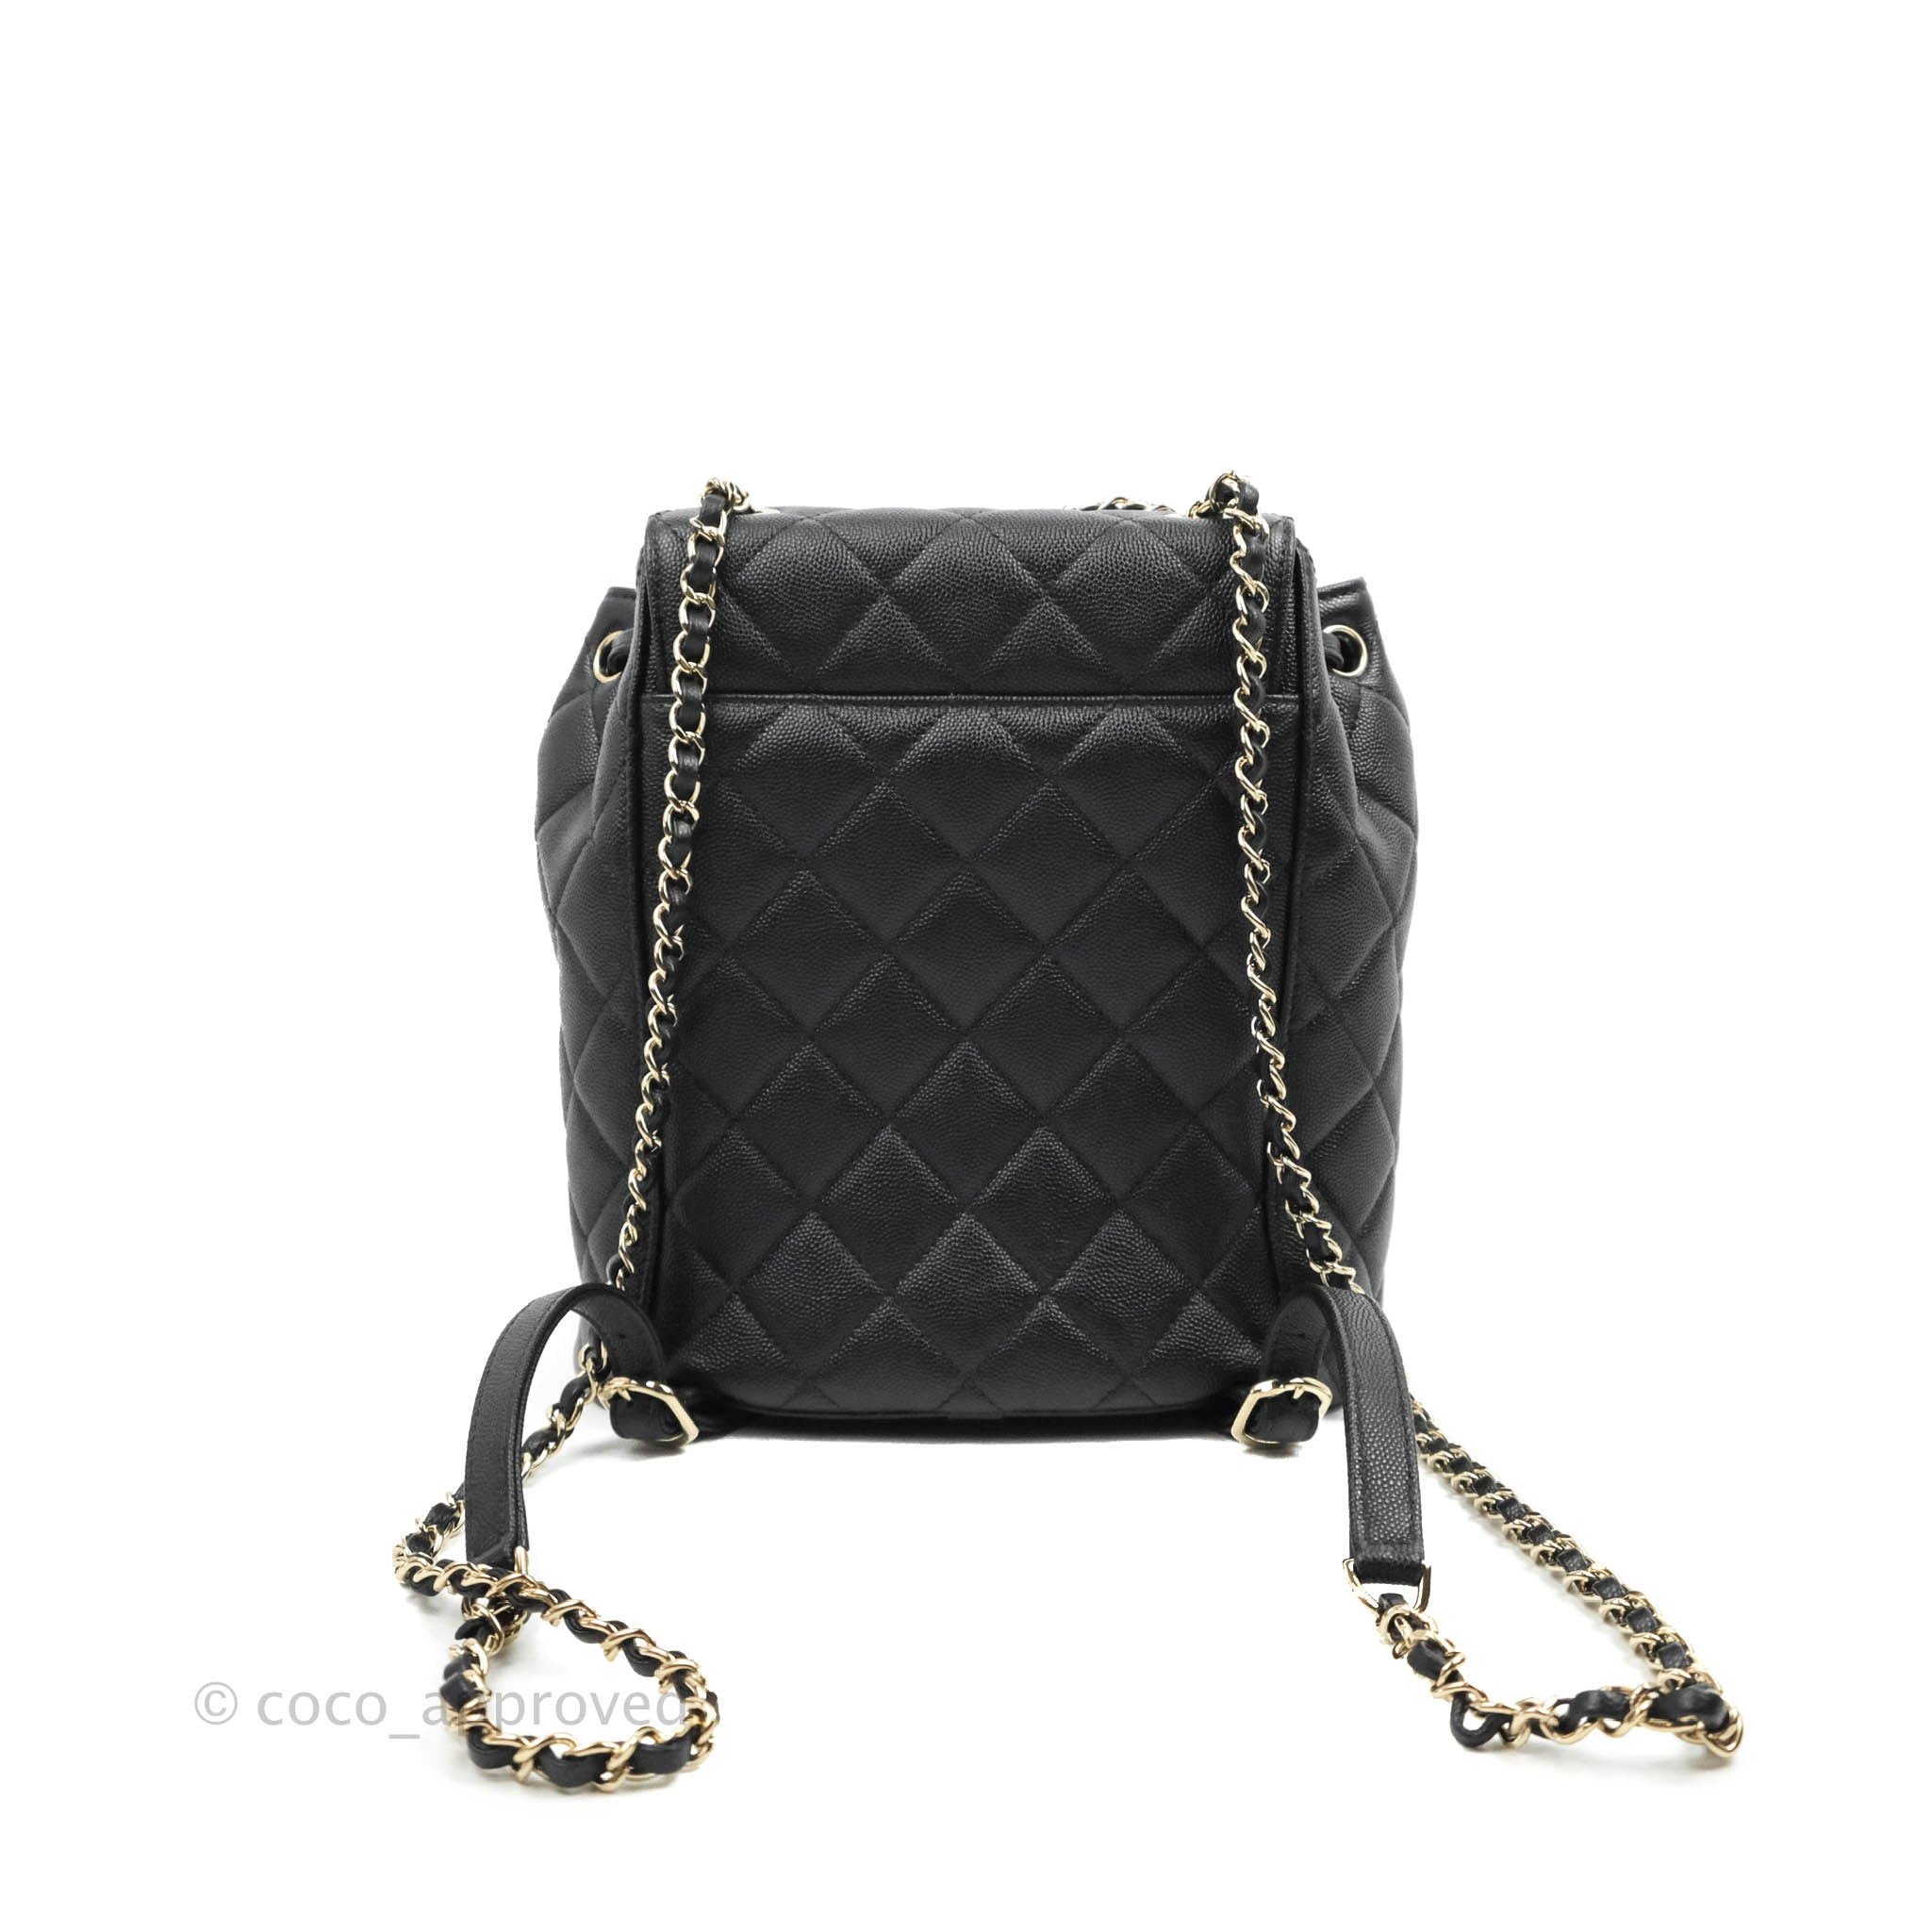 CHANEL, Bags, Chanel Chanel 9 Large Flap Bag 2c